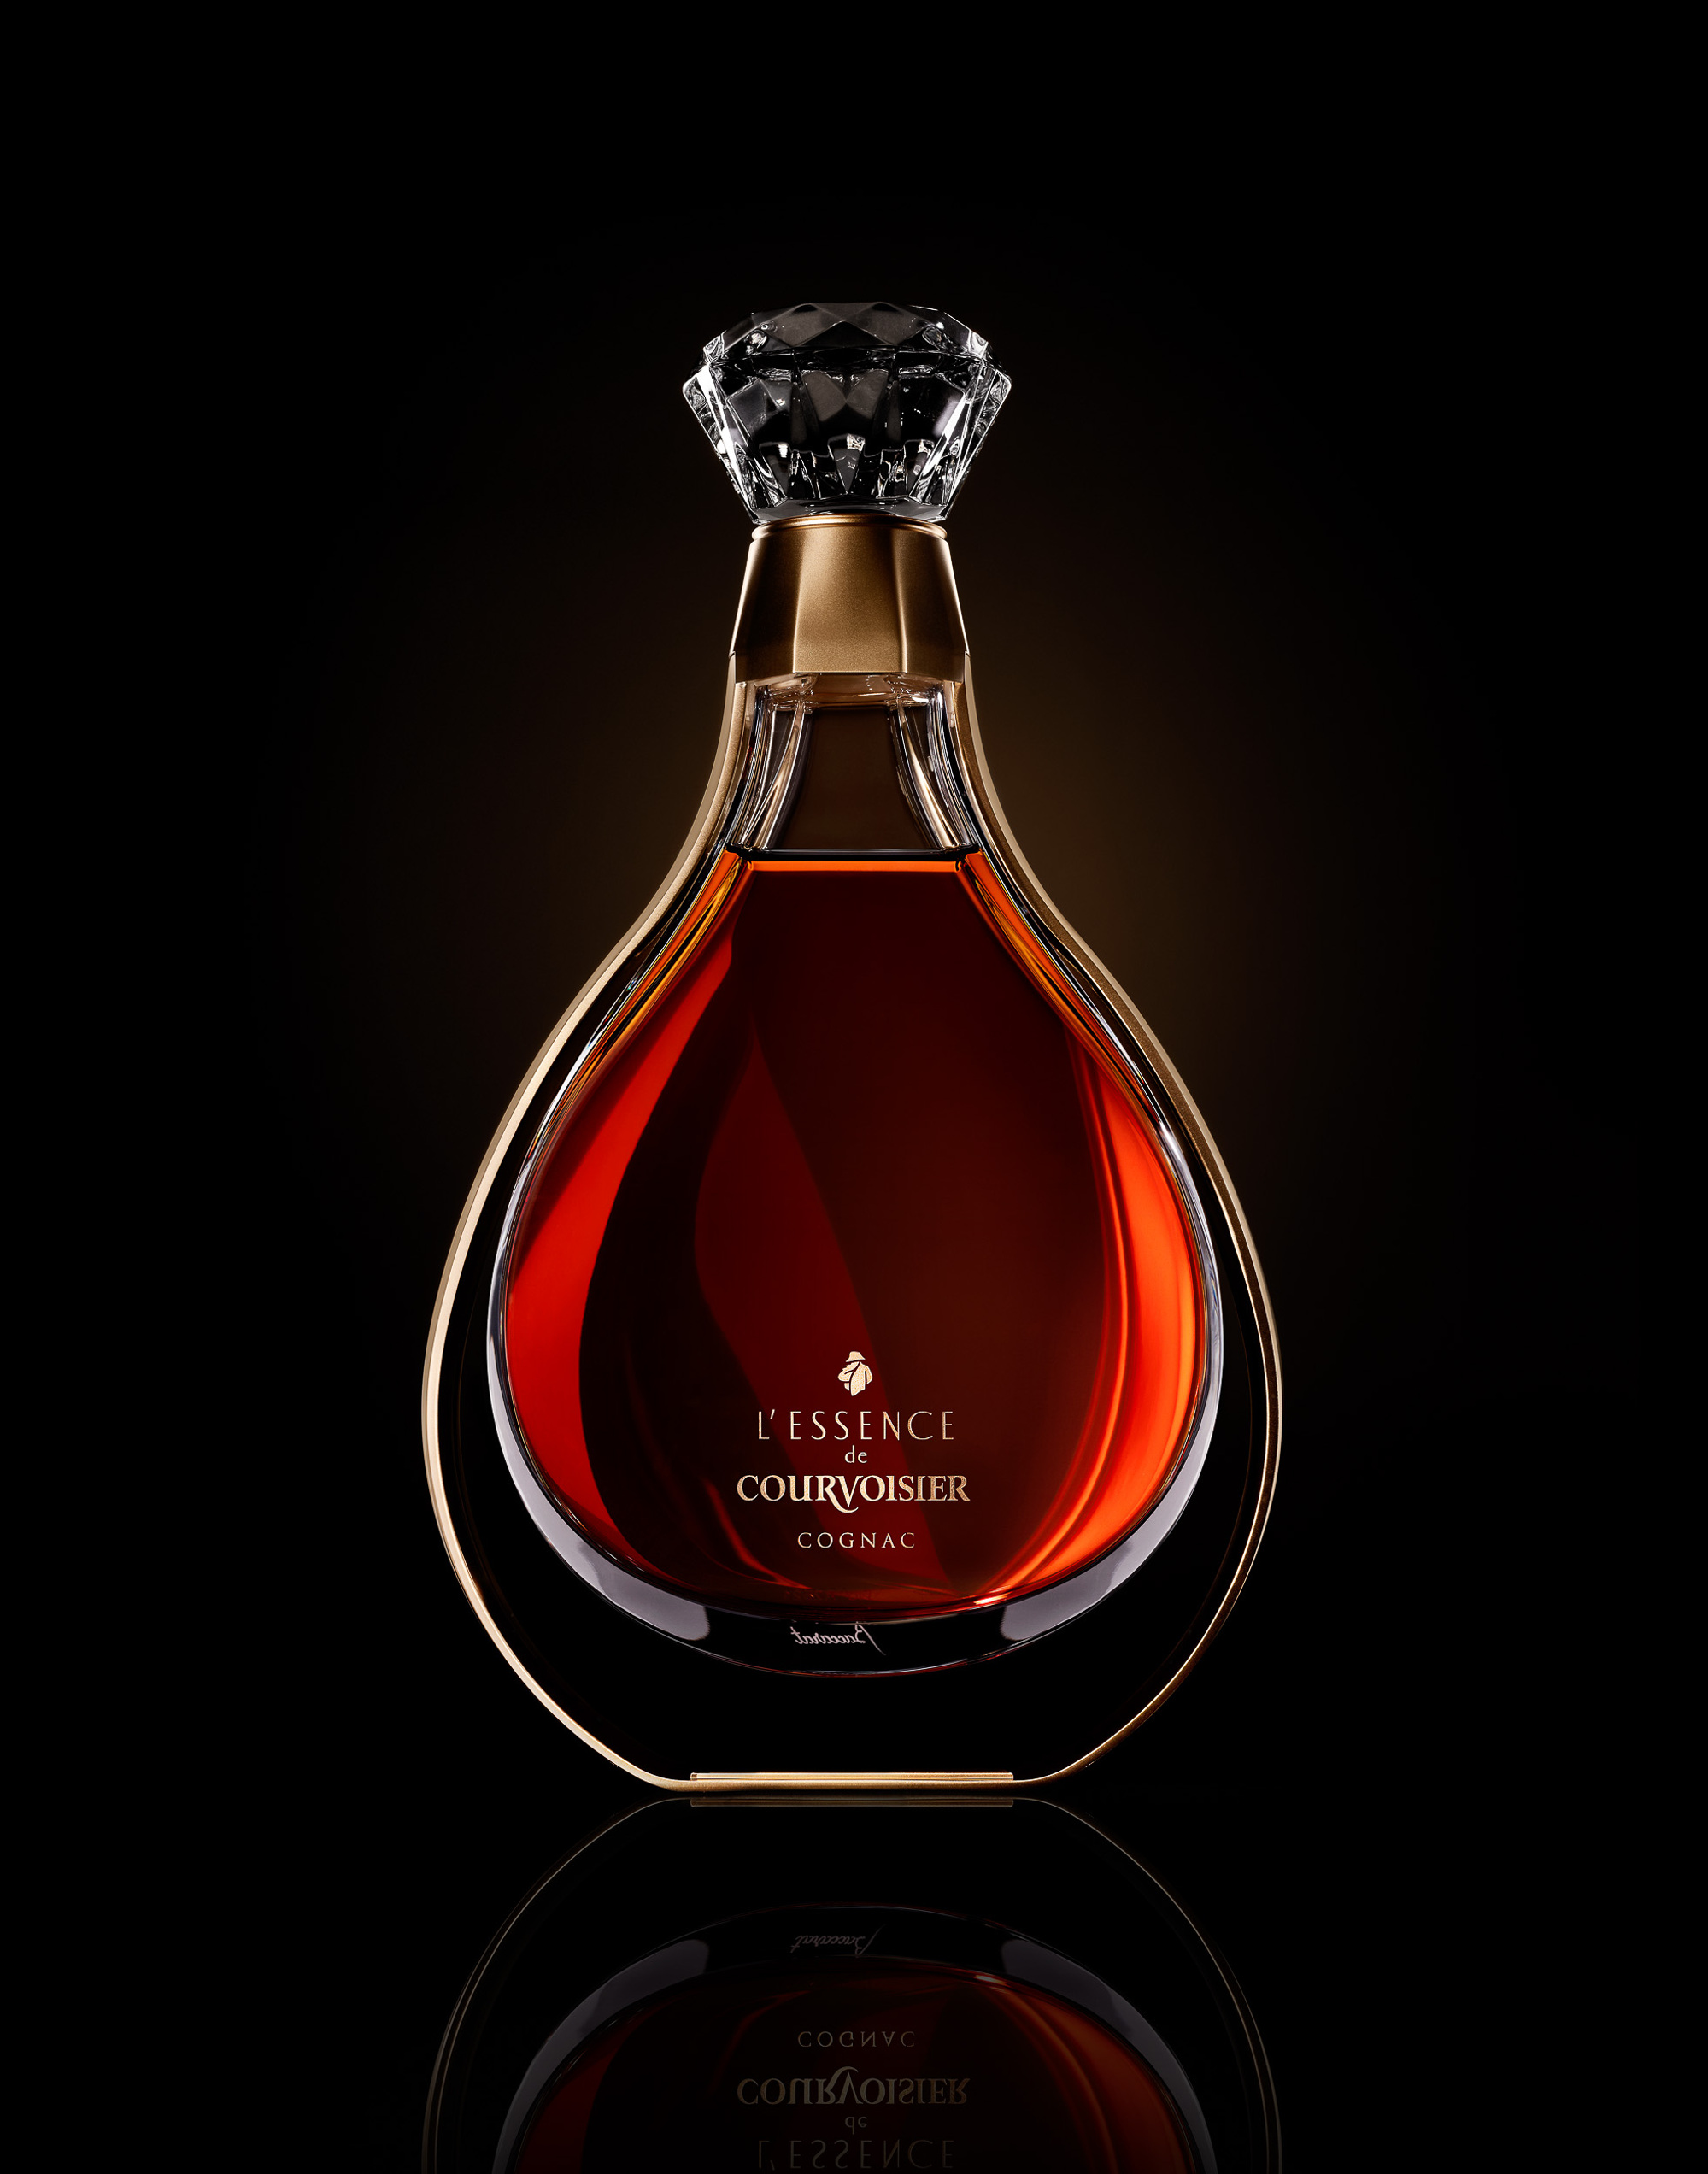 Courvoisier Essence bottle photography. Beverage and liquid product & advertising photography by Timothy Hogan Studio in Los Angeles